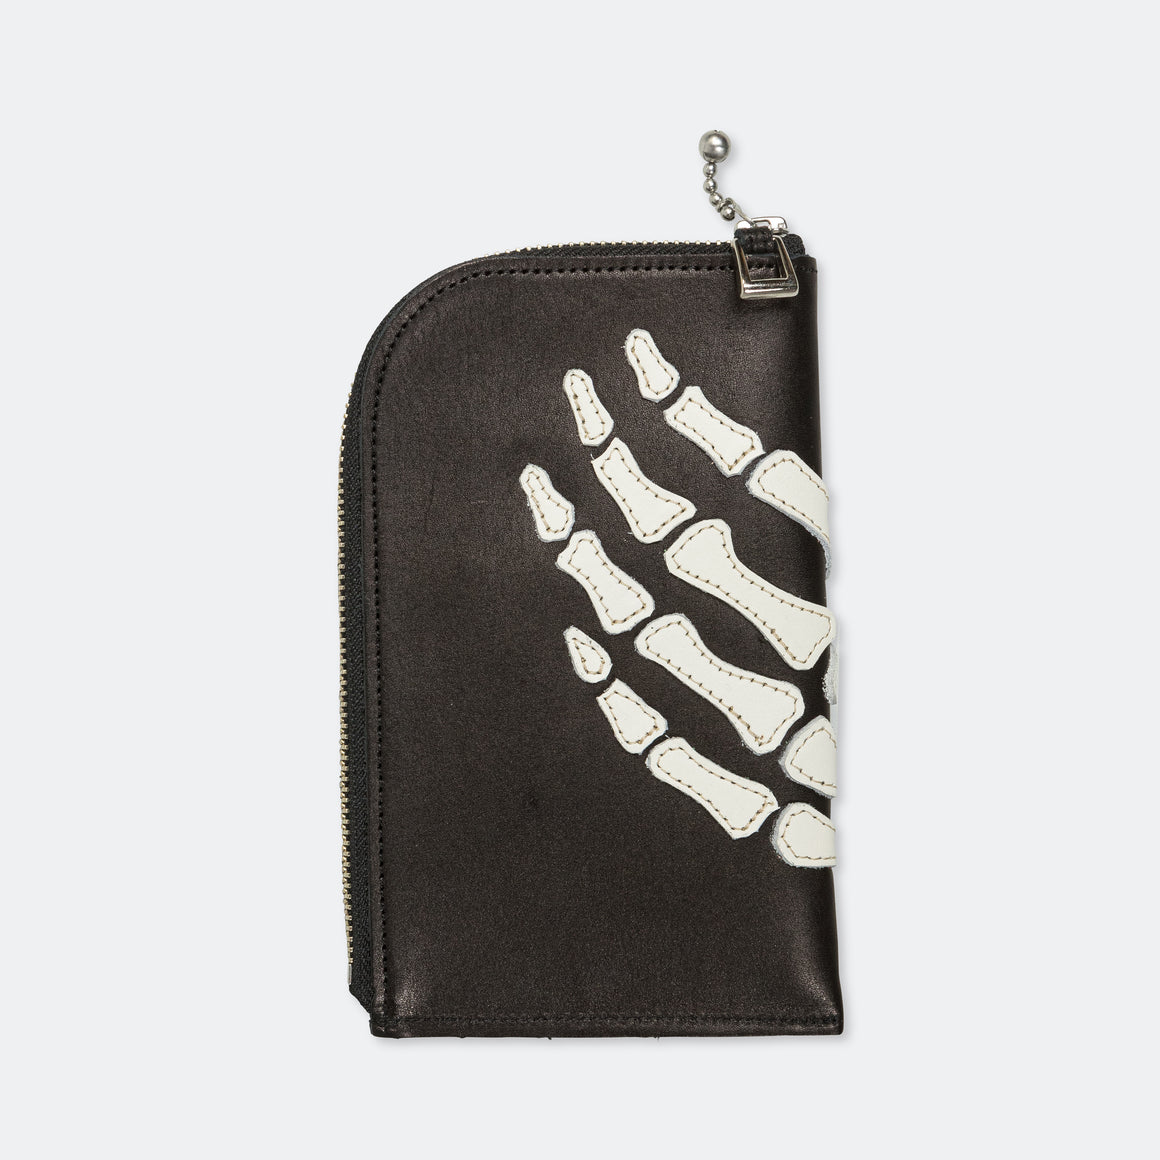 Kapital - Leather THUMBS-UP BONE HAND ZIP Neck Pouch - Black - UP THERE